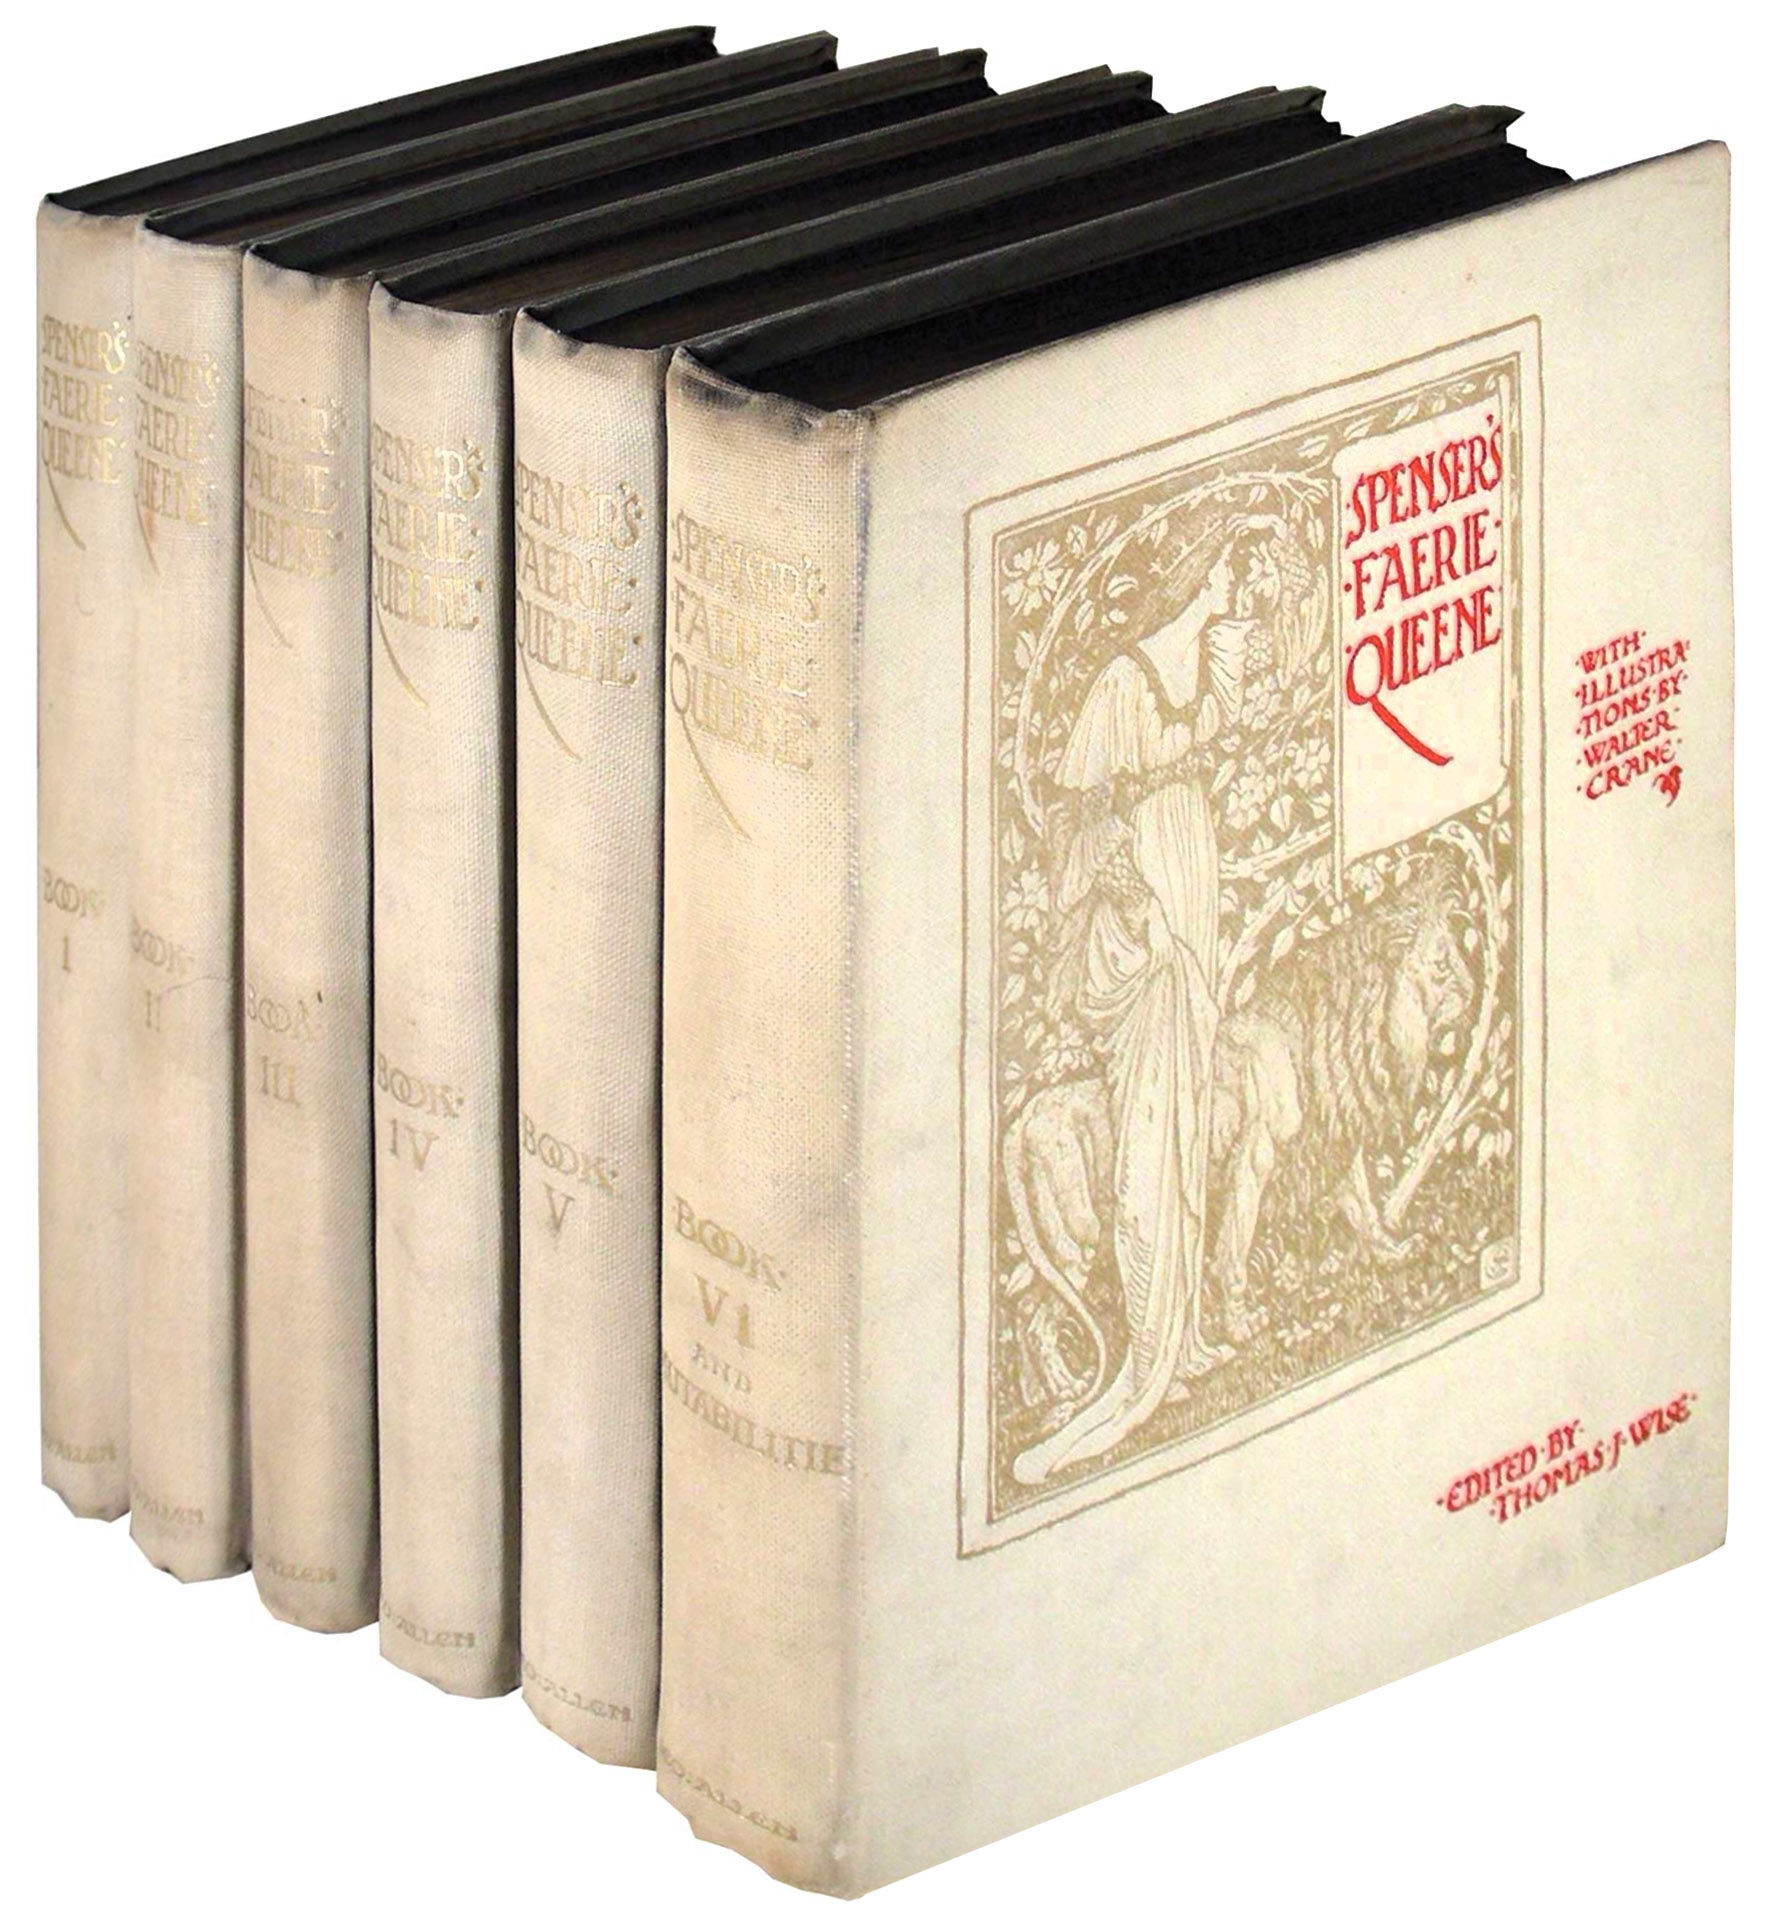 Louis L'Amour Collection - Set of 6 Volumes - Leatherette Hardcovers (The Louis  L'Amour Collection) by Louis L'Amour: Good imitation_leather (1984)